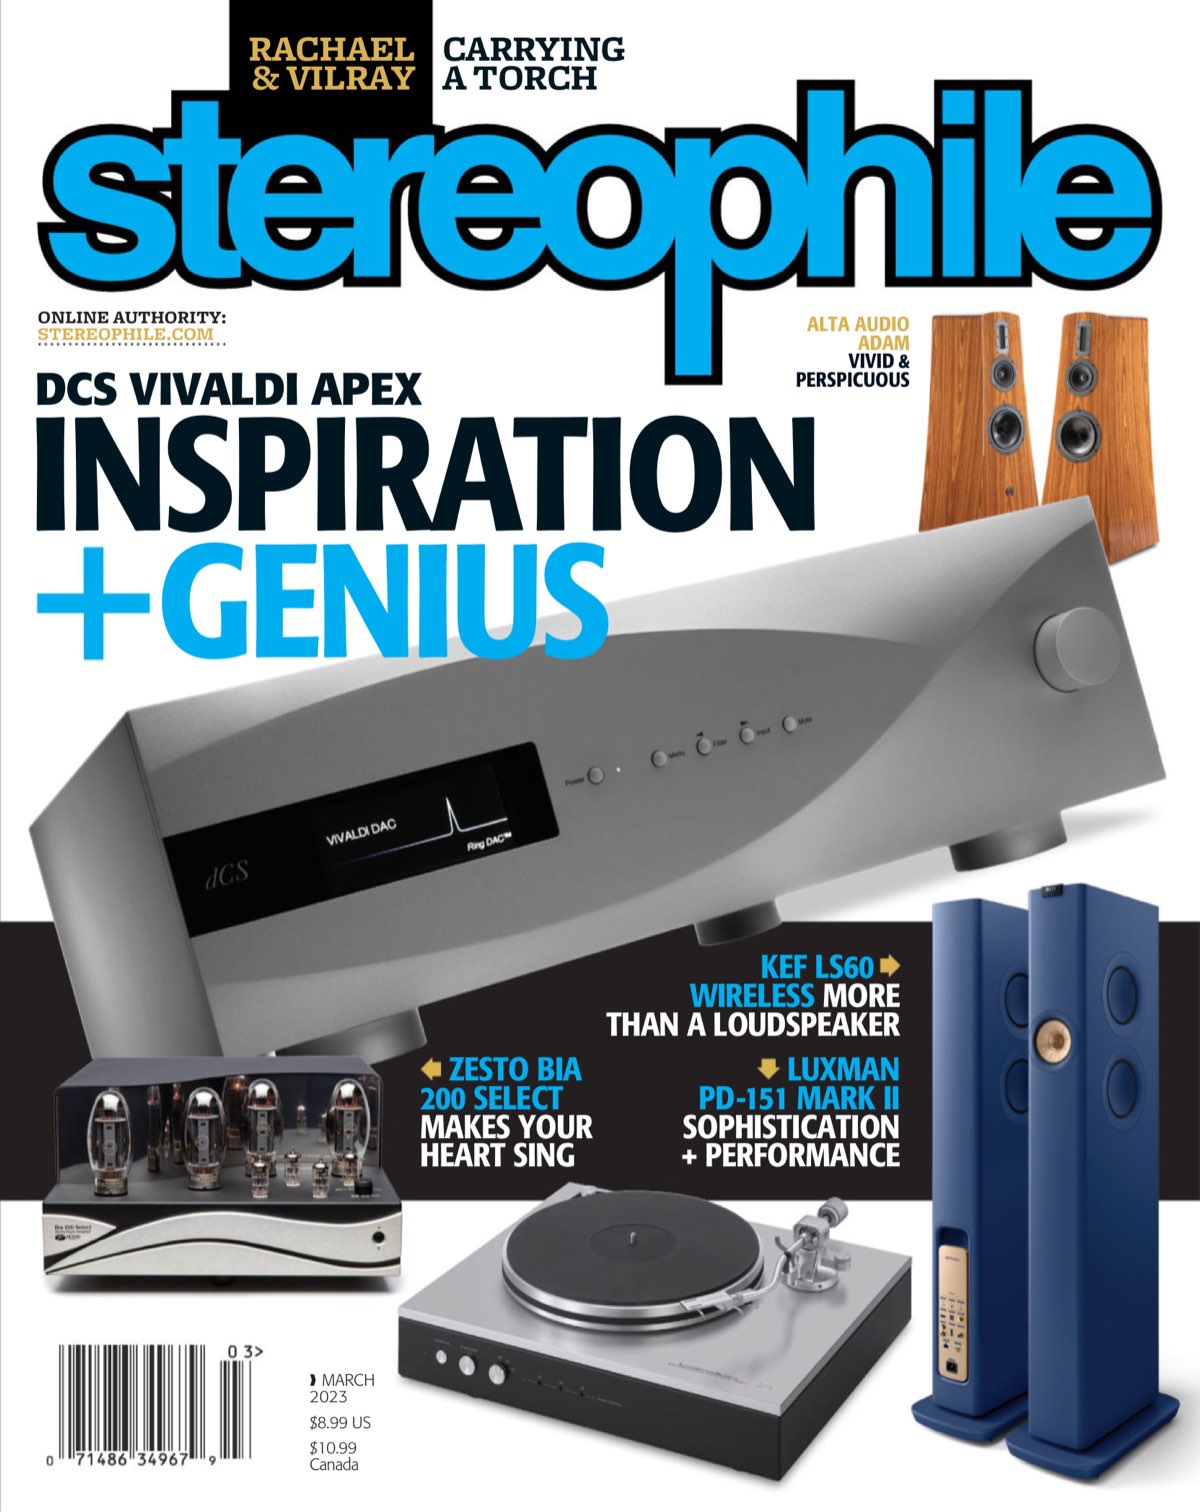 Stereophile - Vol. 46 No. 03 [Mar 2023]